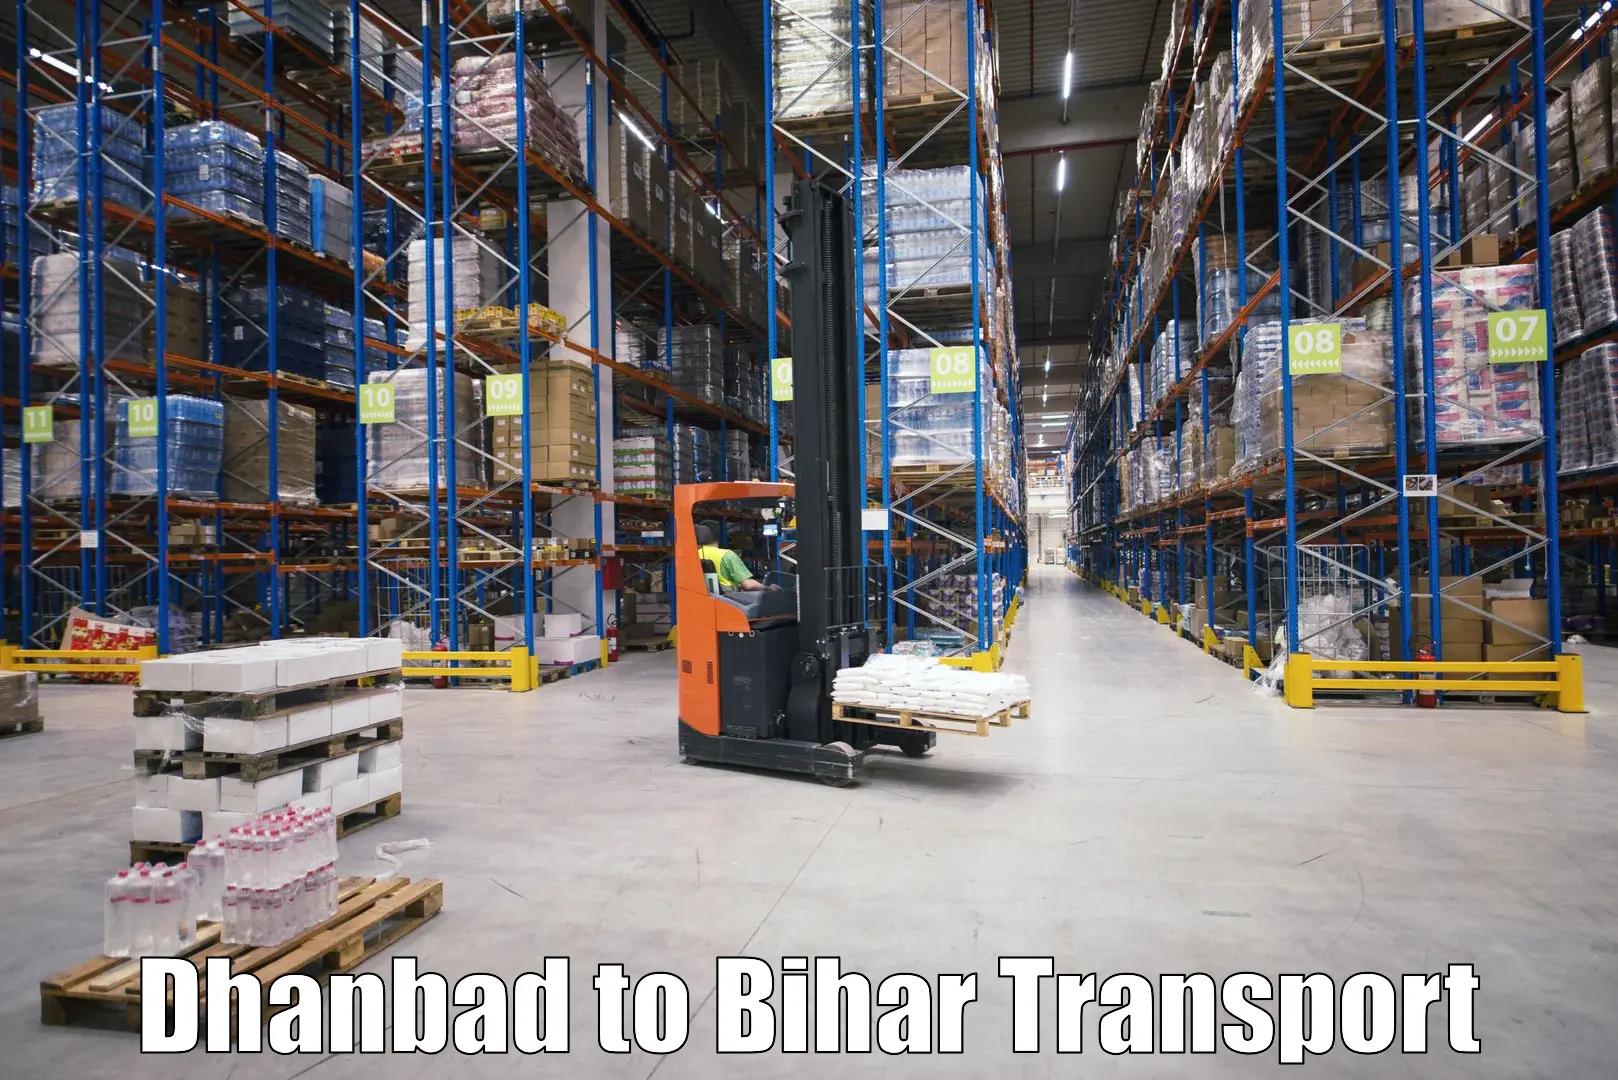 Truck transport companies in India Dhanbad to Birpur